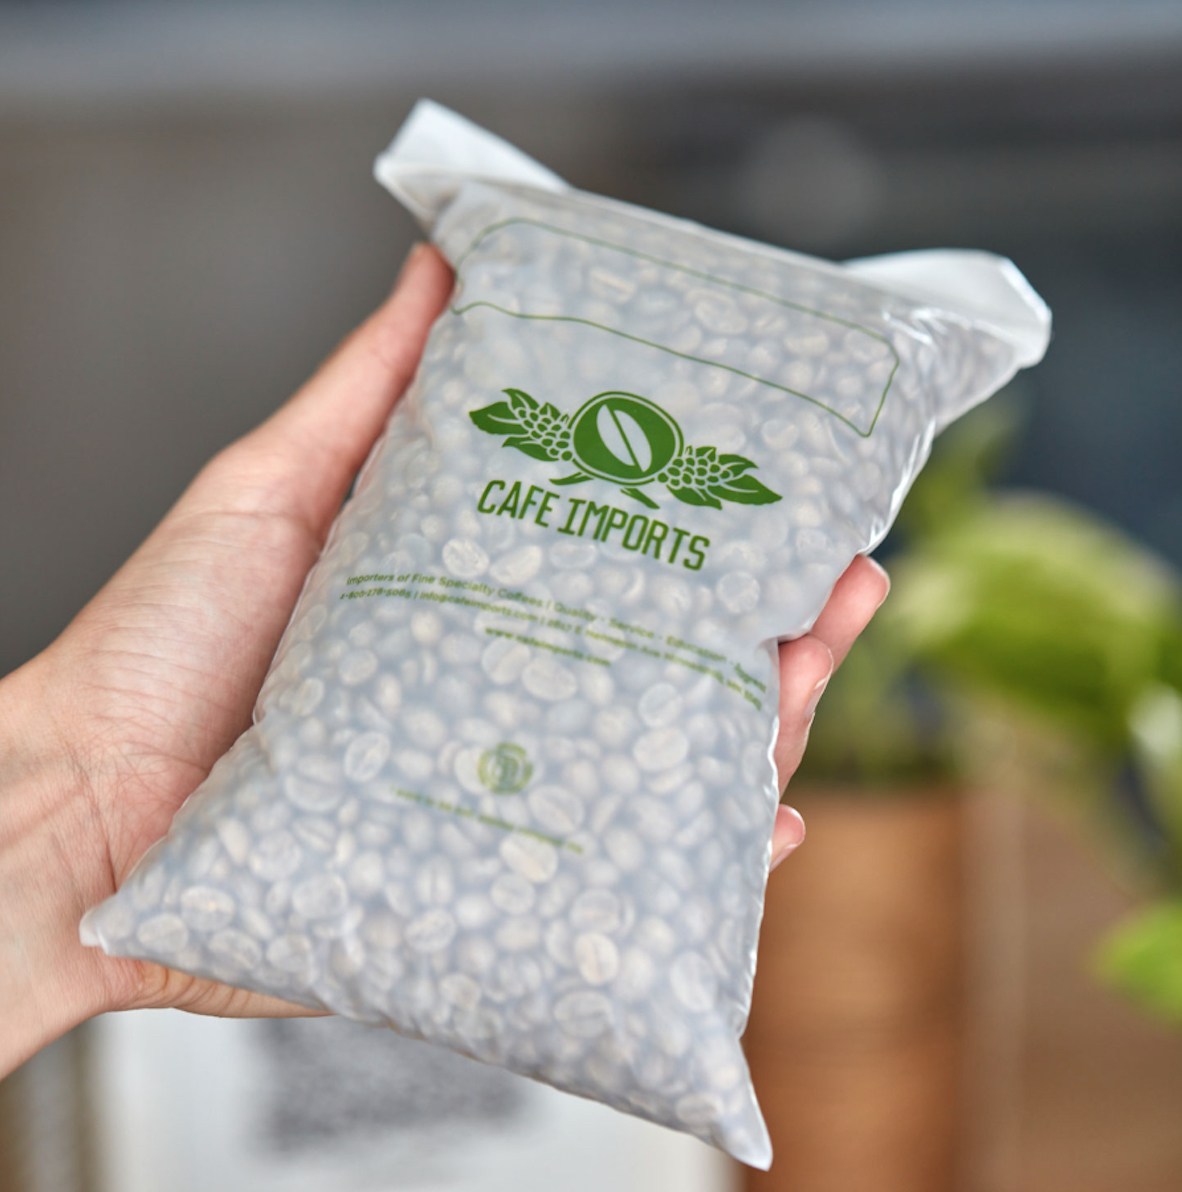 Cafe Imports compostable bags